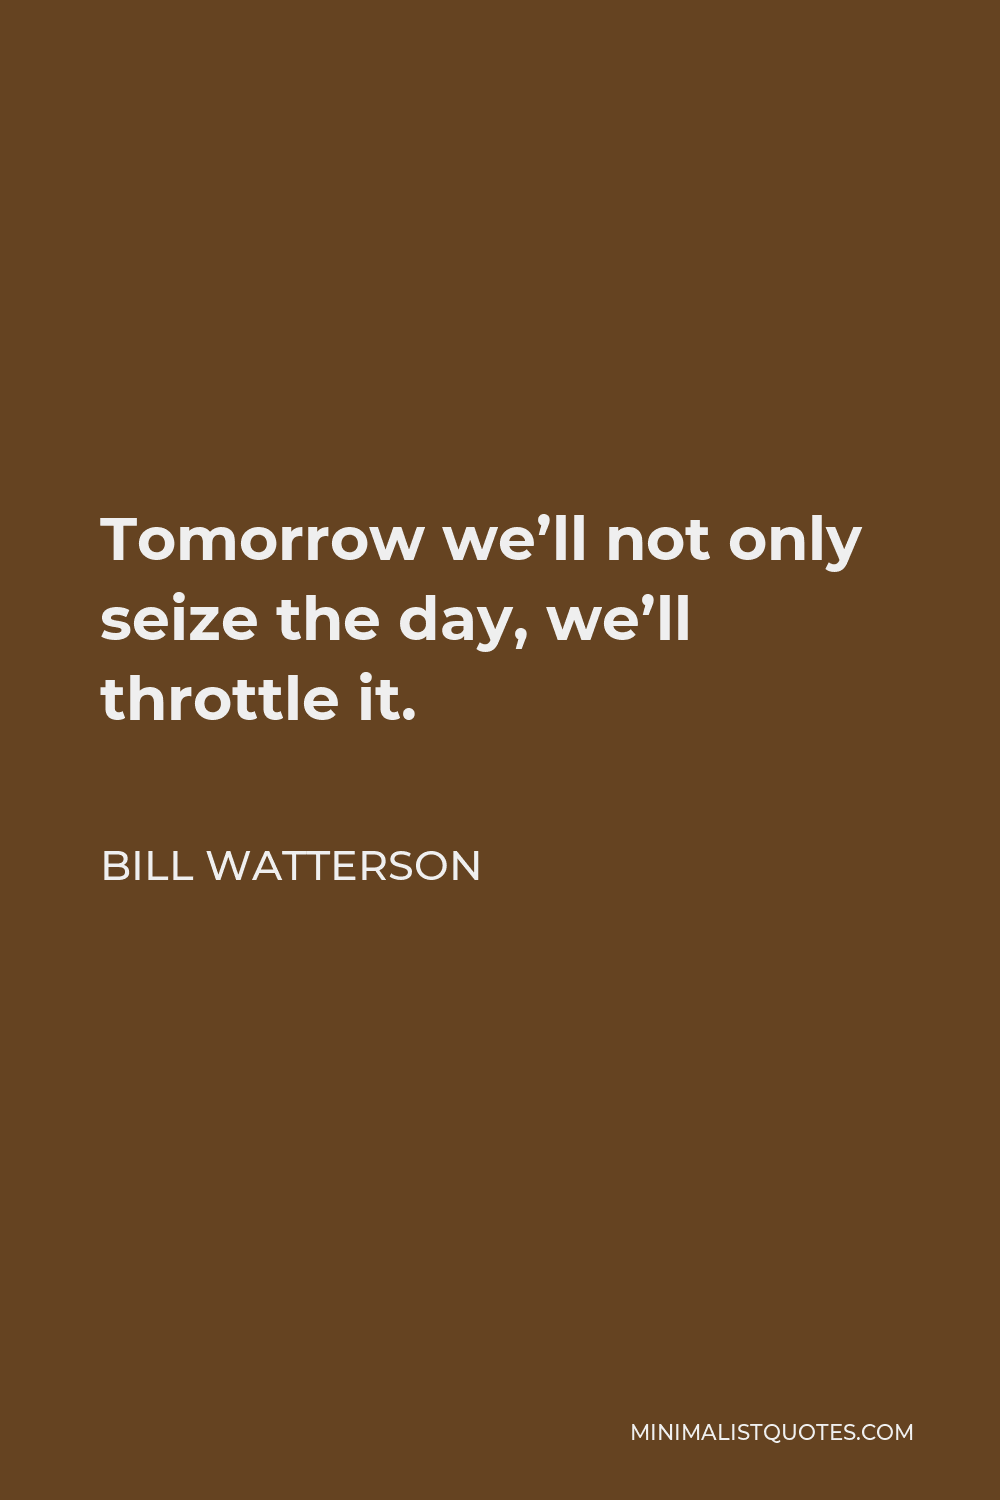 Bill Watterson Quote - Tomorrow we’ll not only seize the day, we’ll throttle it.